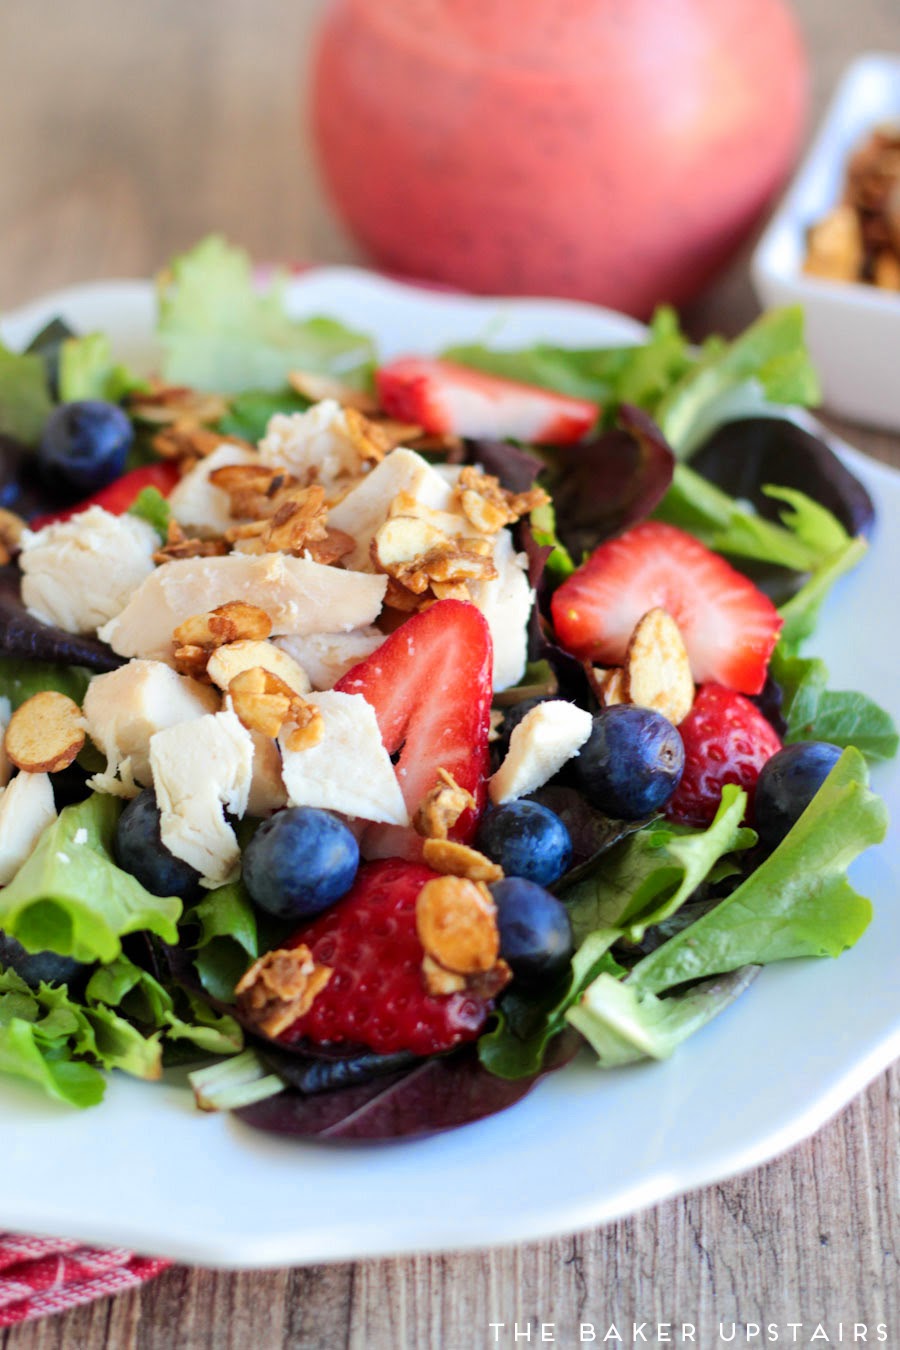 Berry chicken salad and easy candied almonds - so fresh, healthy, and delicious!